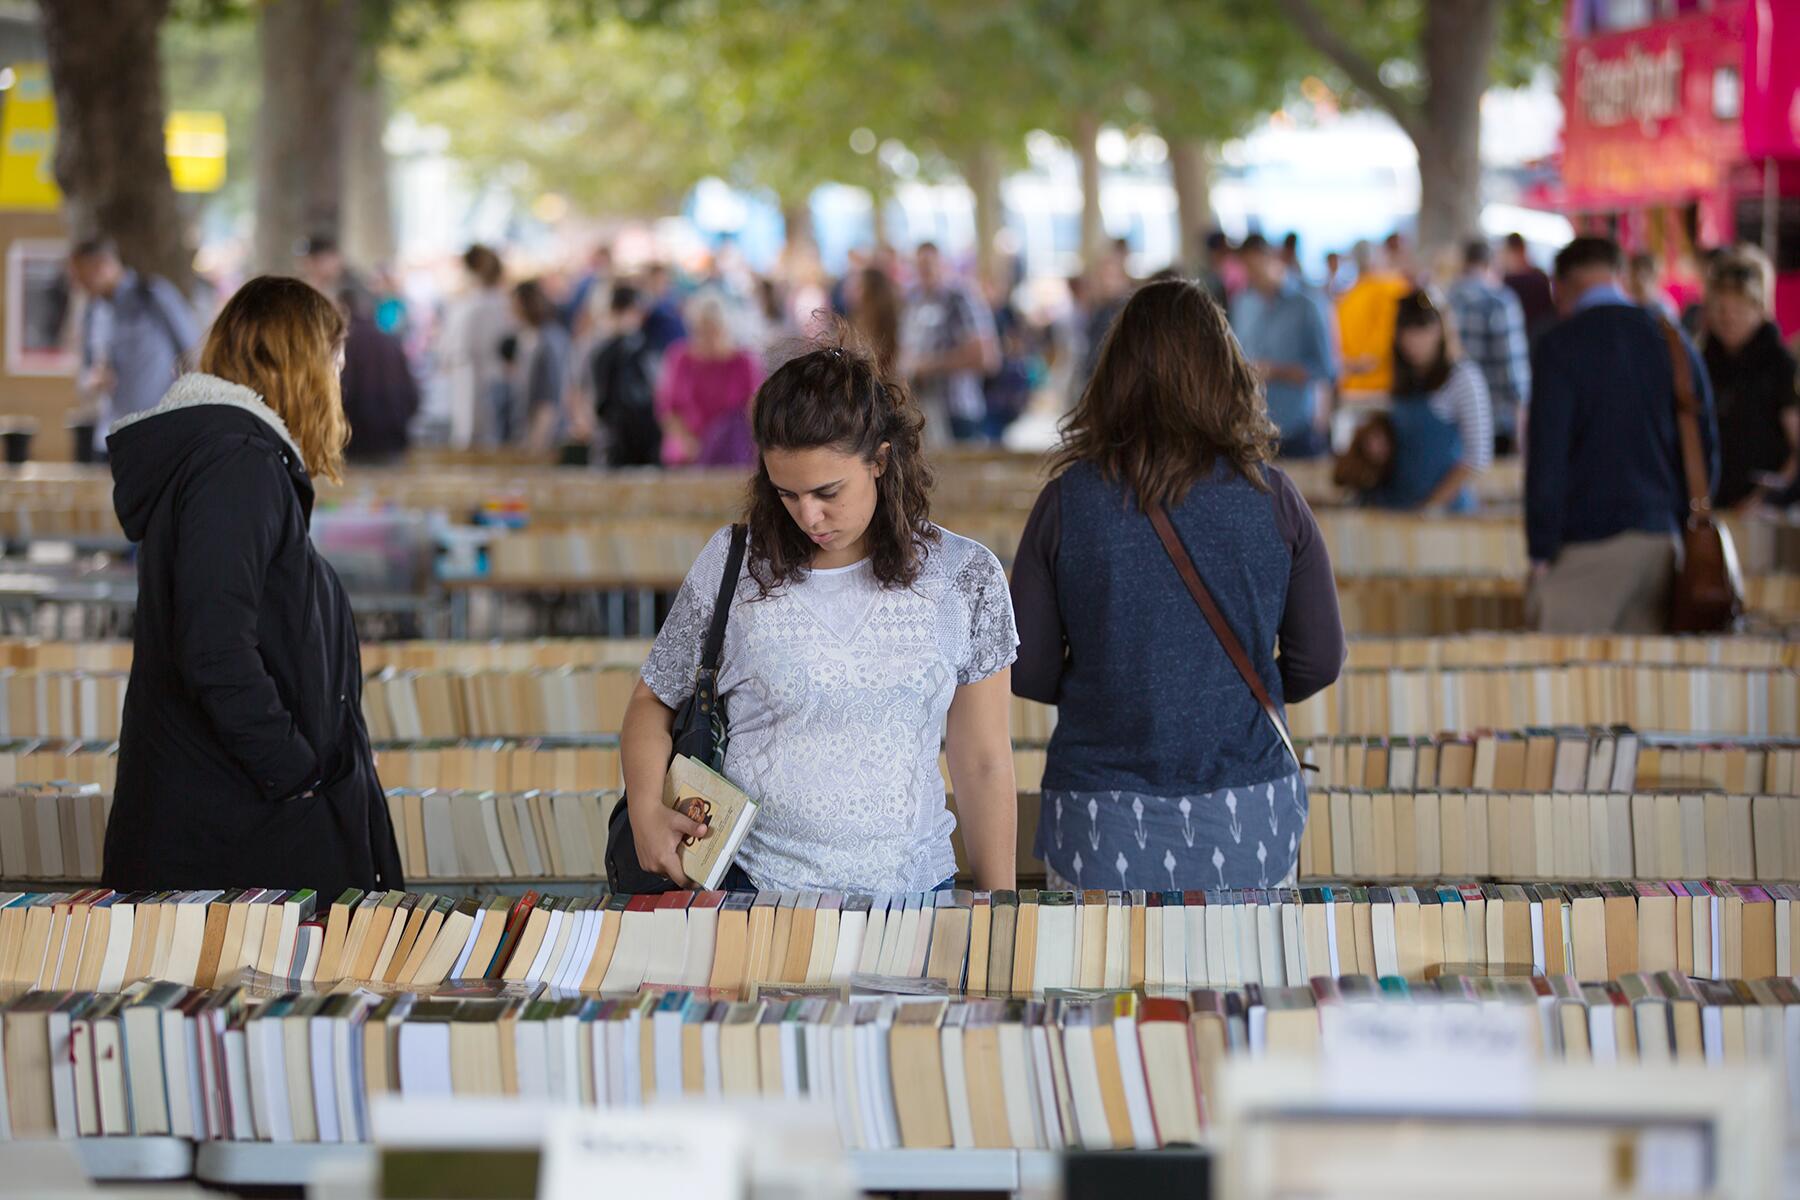 <a href='https://www.fodors.com/world/europe/england/london/experiences/news/photos/the-11-best-street-markets-to-visit-in-london#'>From &quot;The 11 Best Street Markets to Visit in London: Southbank Centre Book Market&quot;</a>